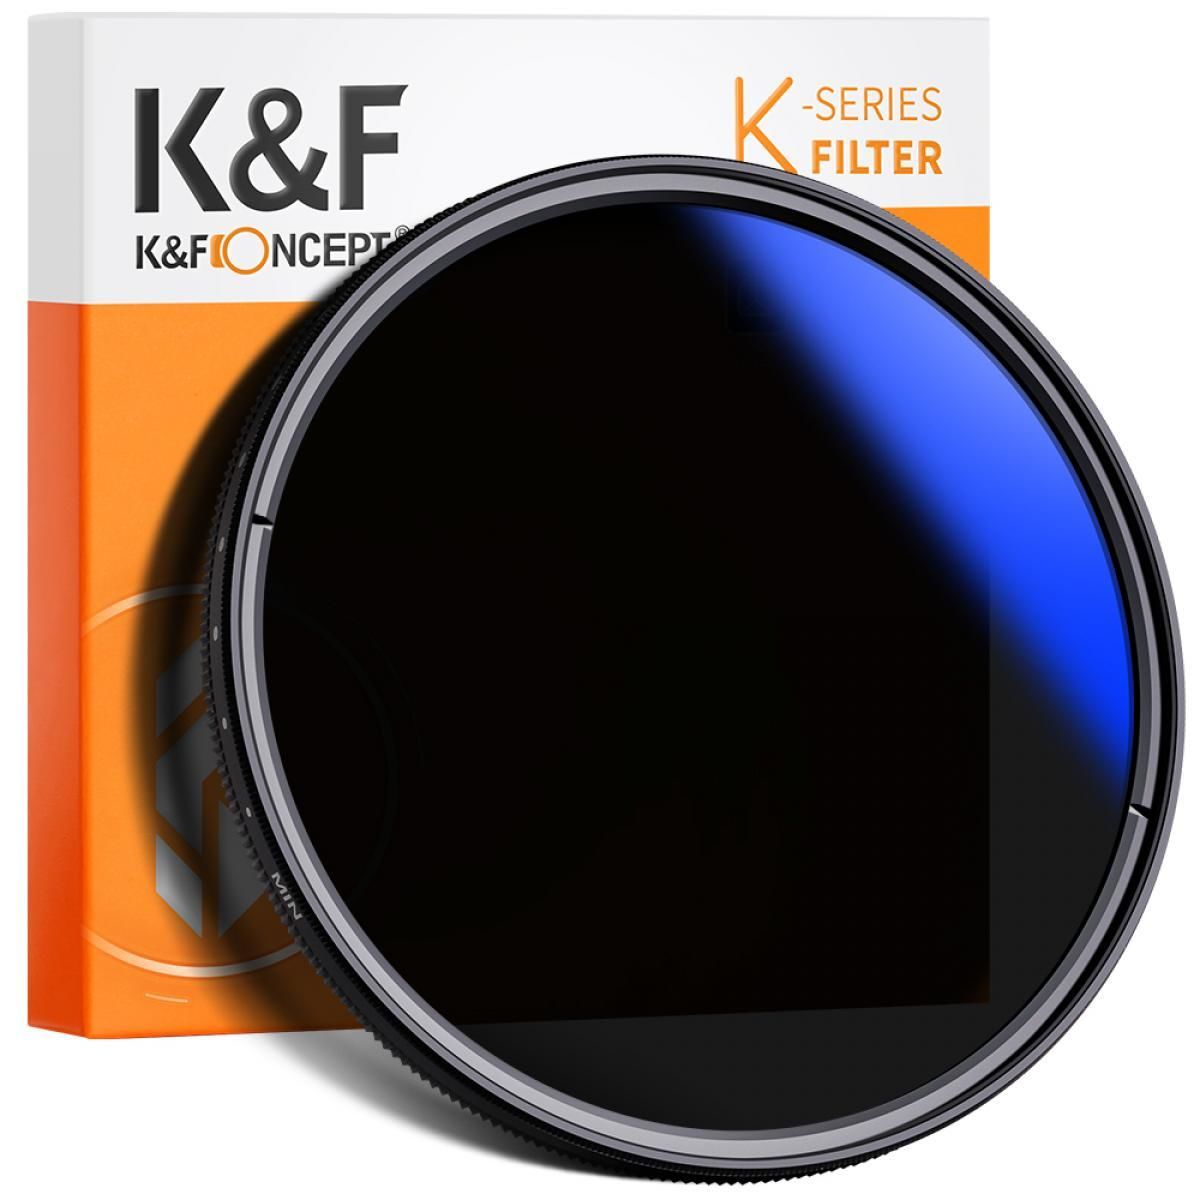 K&F Concept 58mm B-SERIES ND2-ND400 (1 ile 9 Stop) ND Filtre